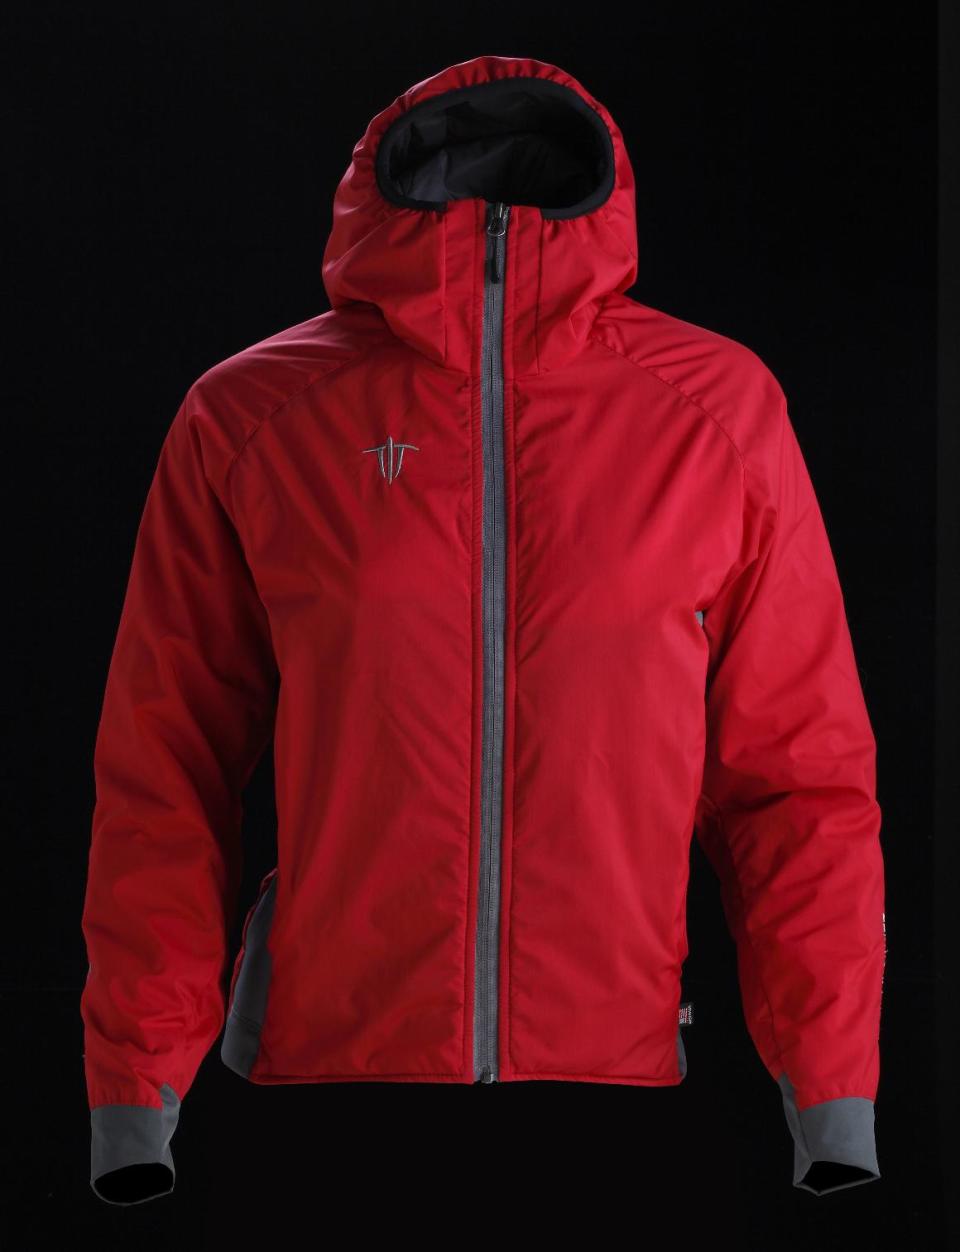 This product image released by Wild Things shows a women's Insulight jacket, featuring an insulated hood. (AP Photo/Wild Things)